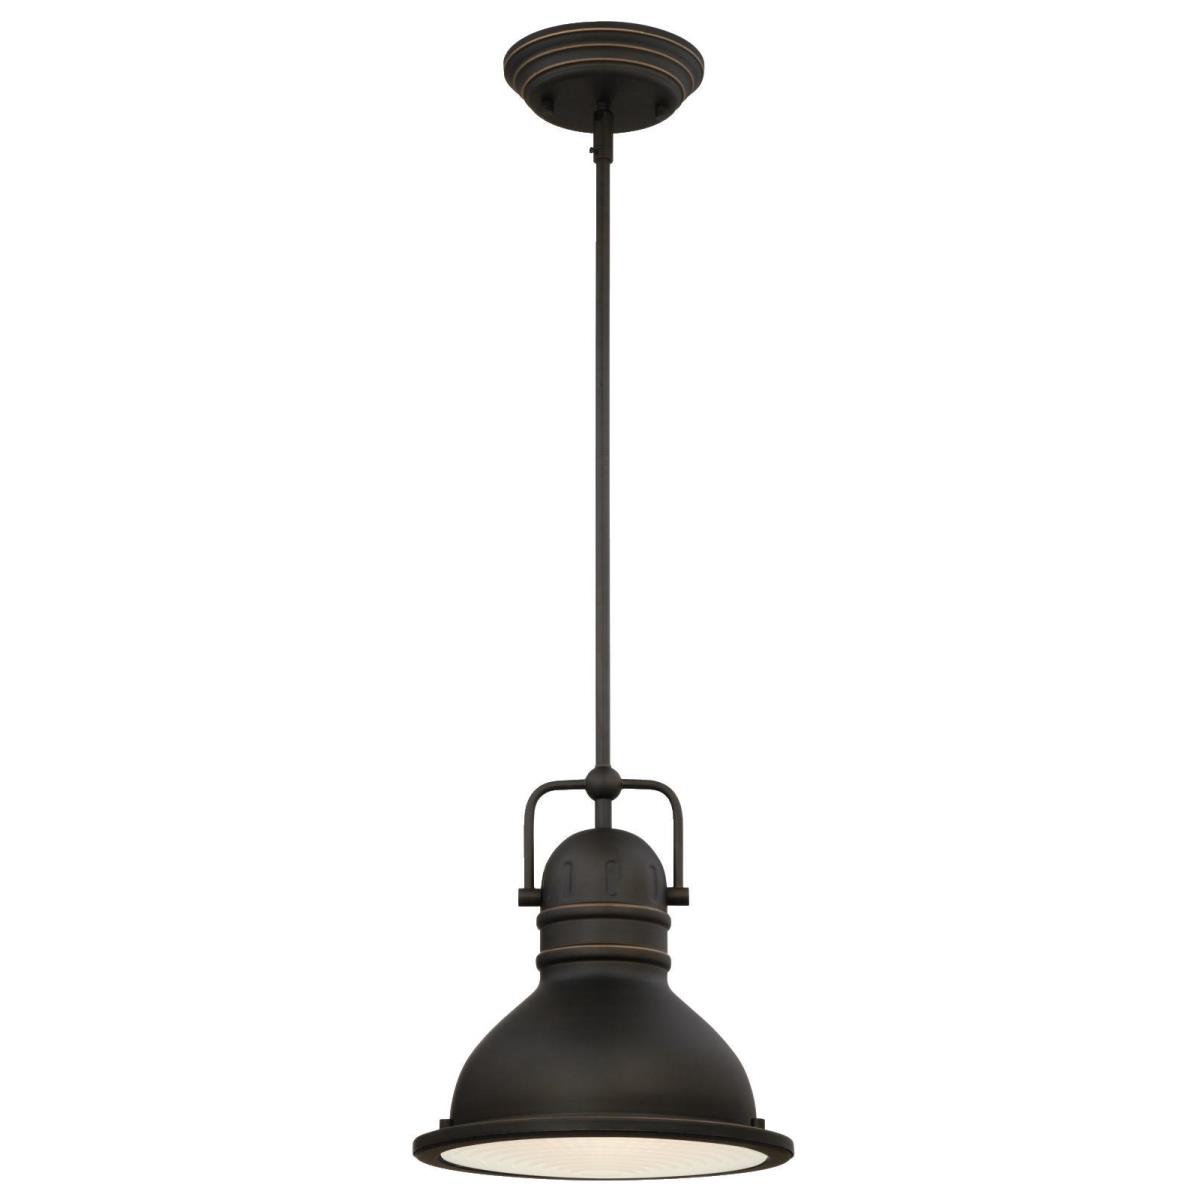 1 Light LED Pendant Oil Rubbed Bronze Finish with Highlights and Prismatic Lens